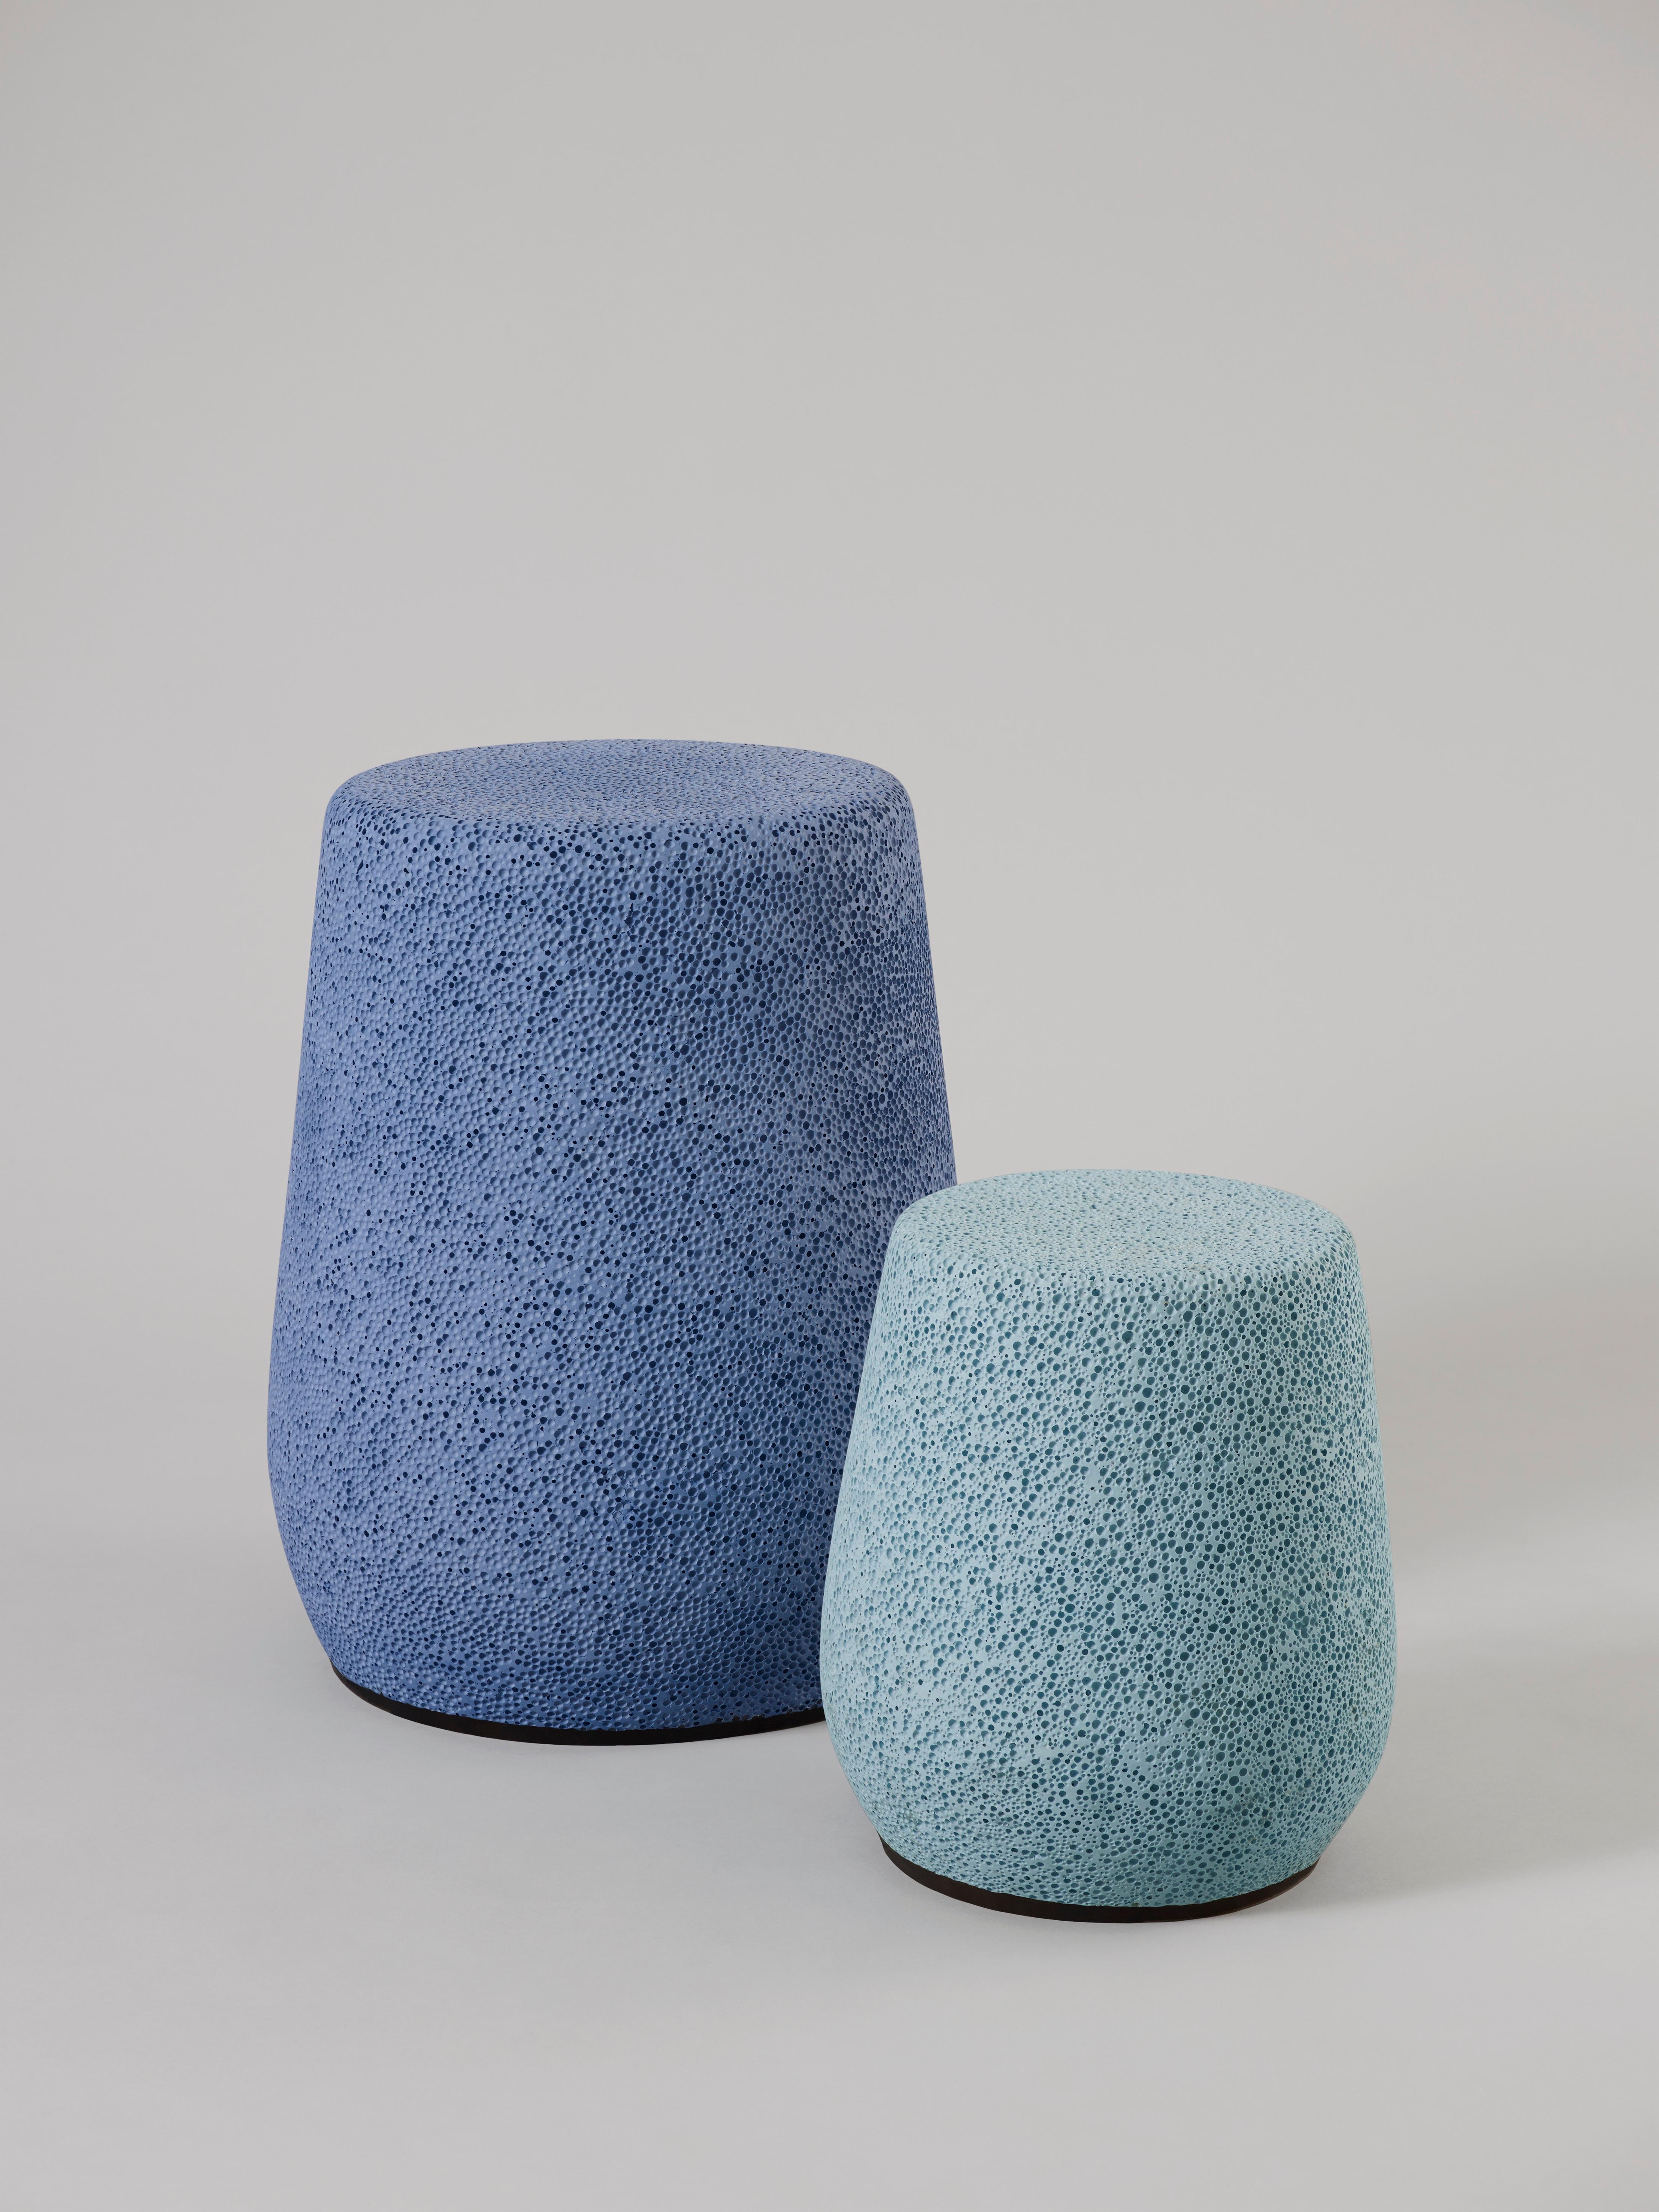 Contemporary 'Lightweight Porcelain' Stool and Side Table by Djim Berger - Dark Blue For Sale